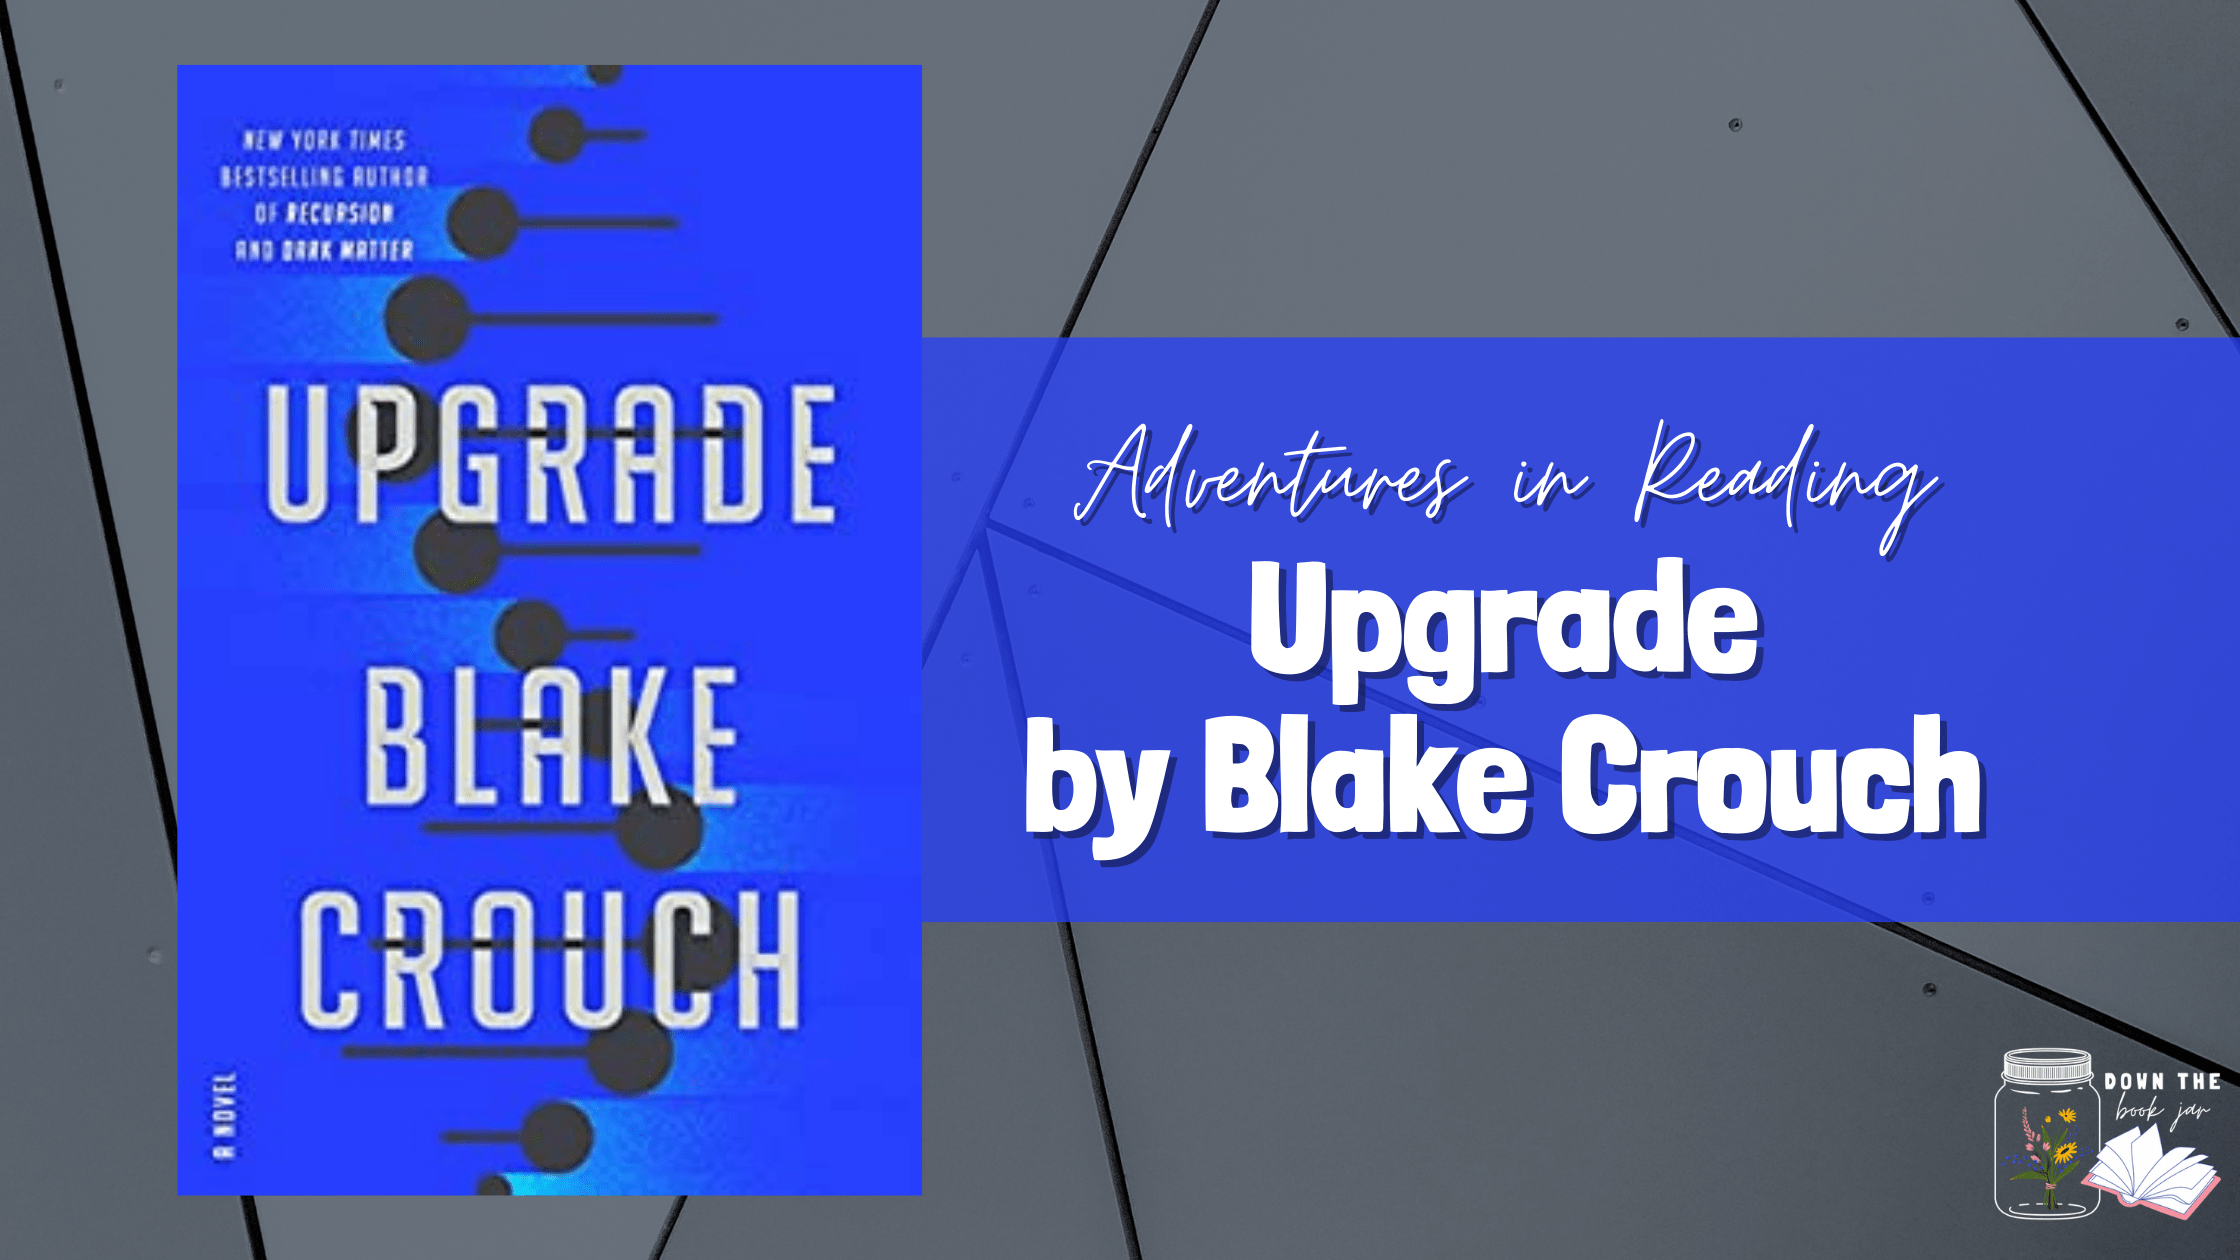 Upgrade by Blake Crouch - Down the Book Jar